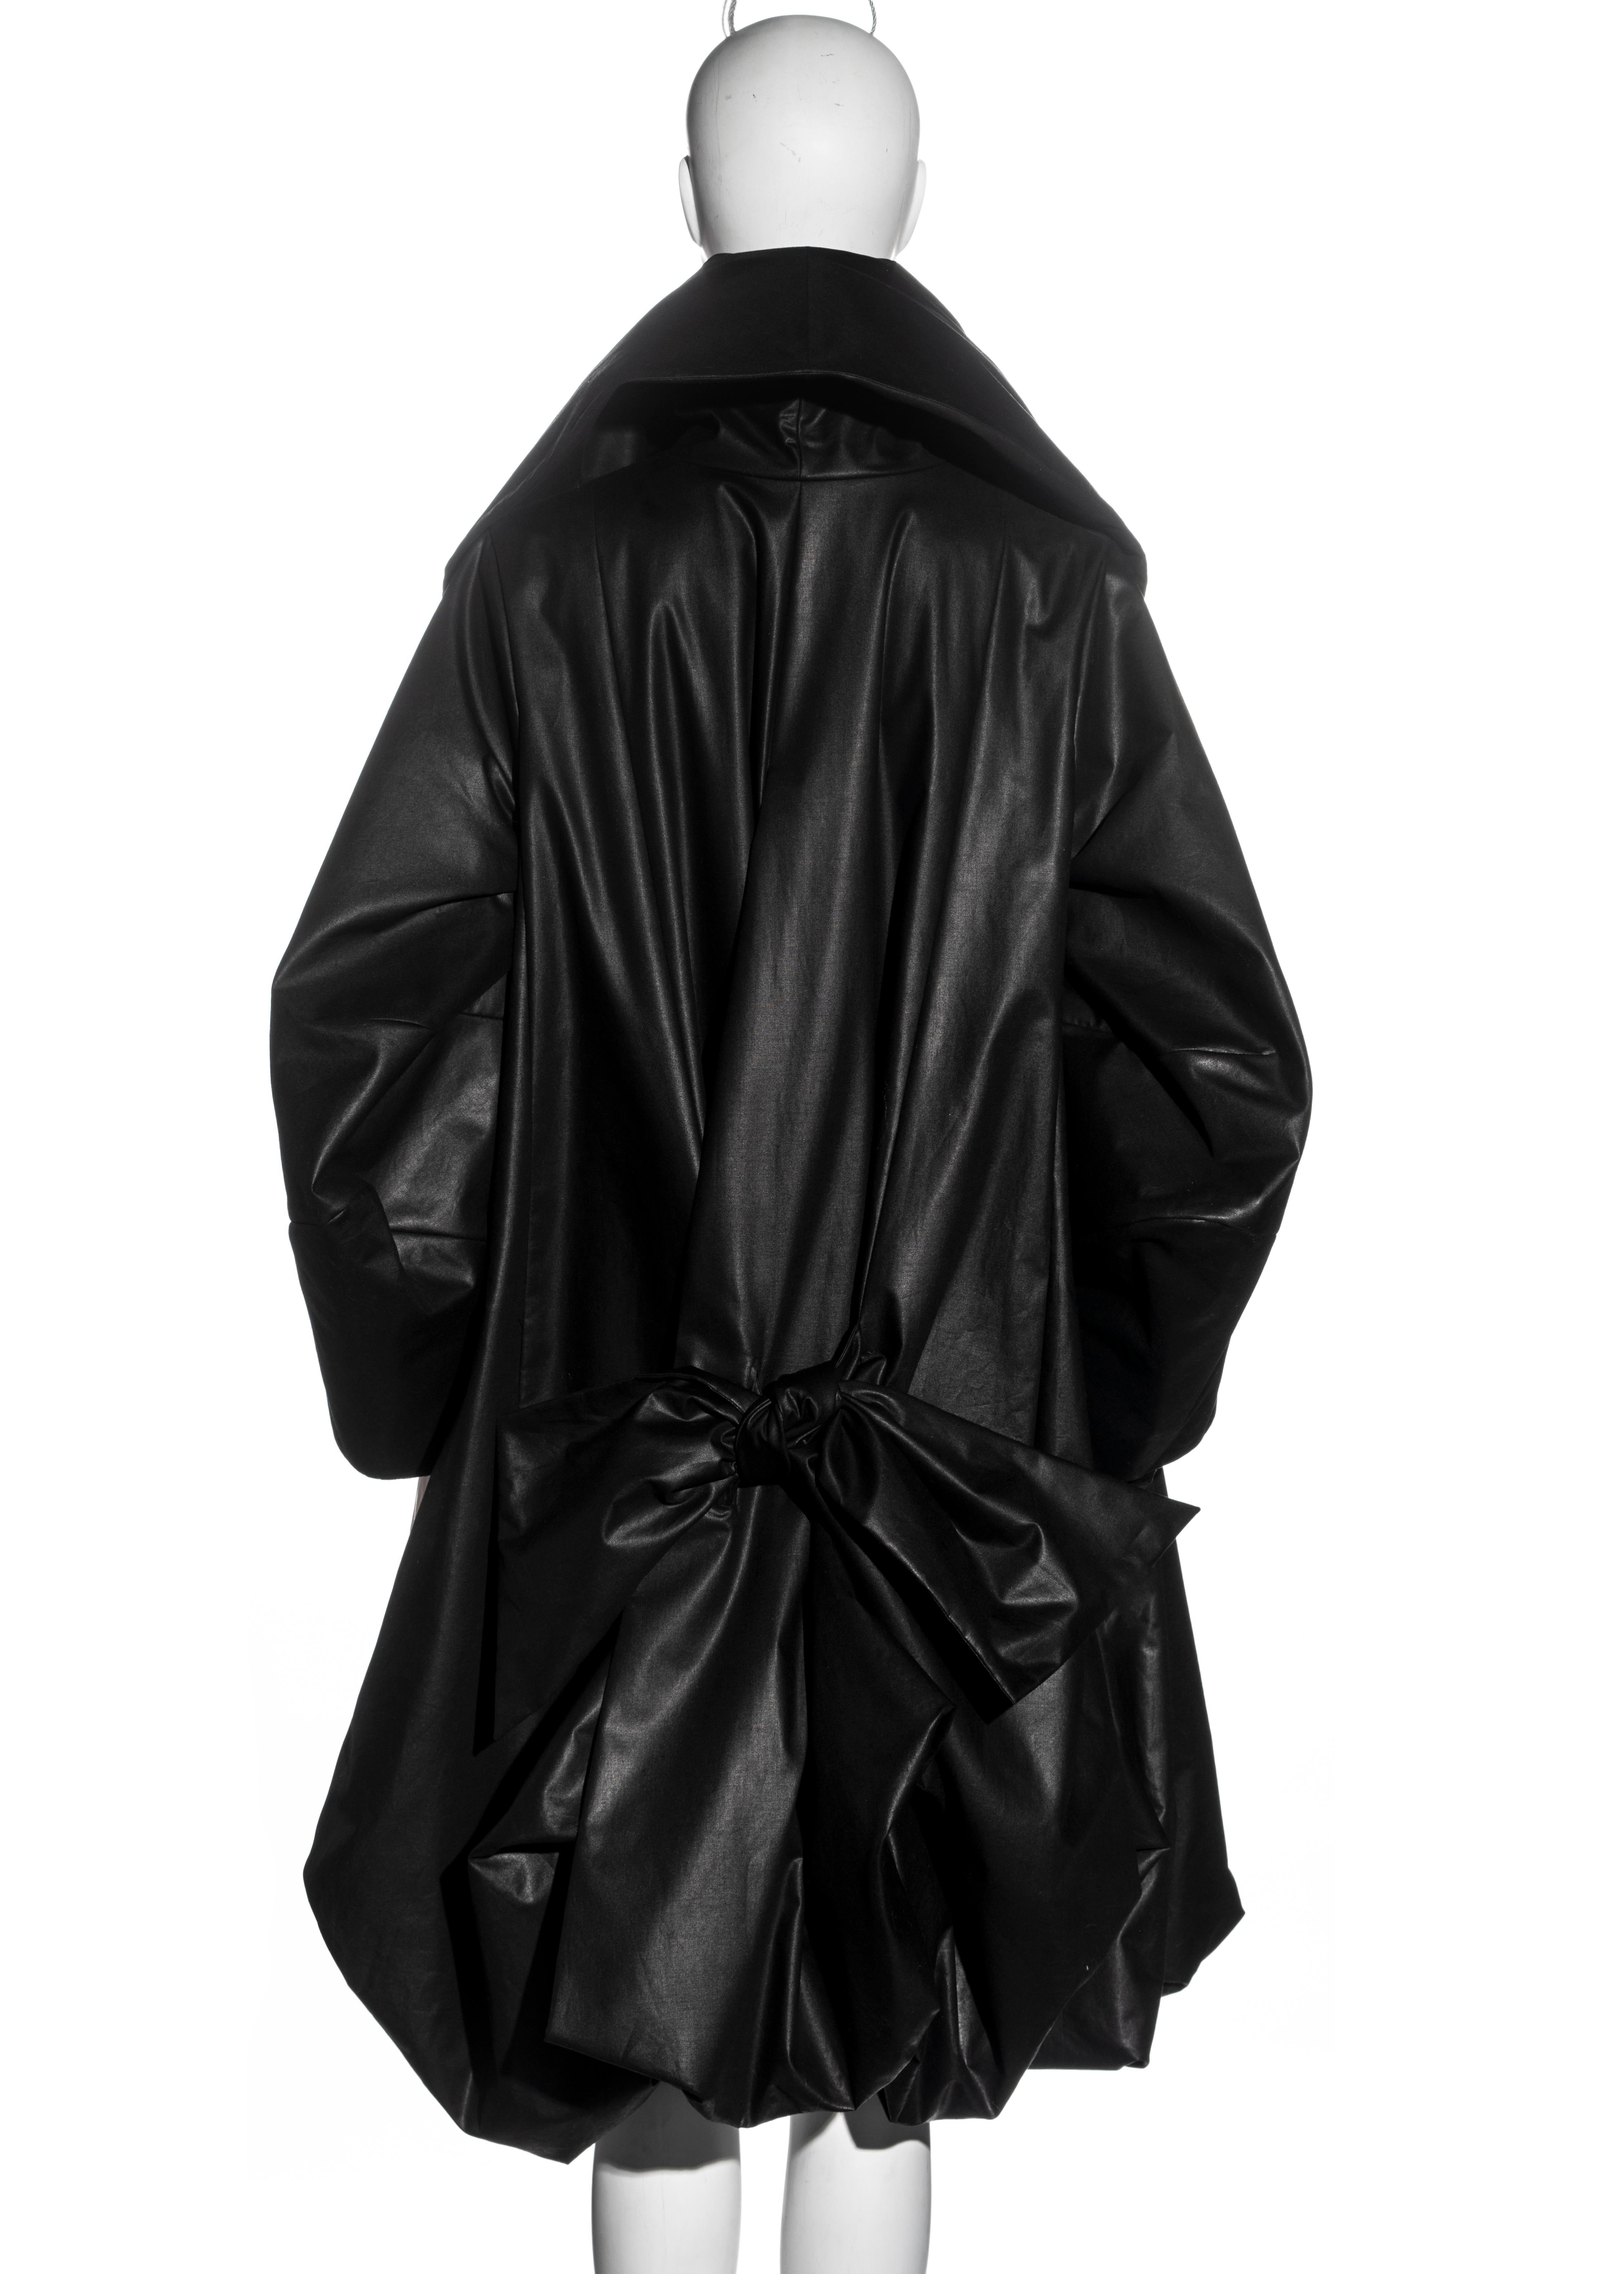 Christian Dior by John Galliano black waxed cotton opera coat, ss 1999 For Sale 6